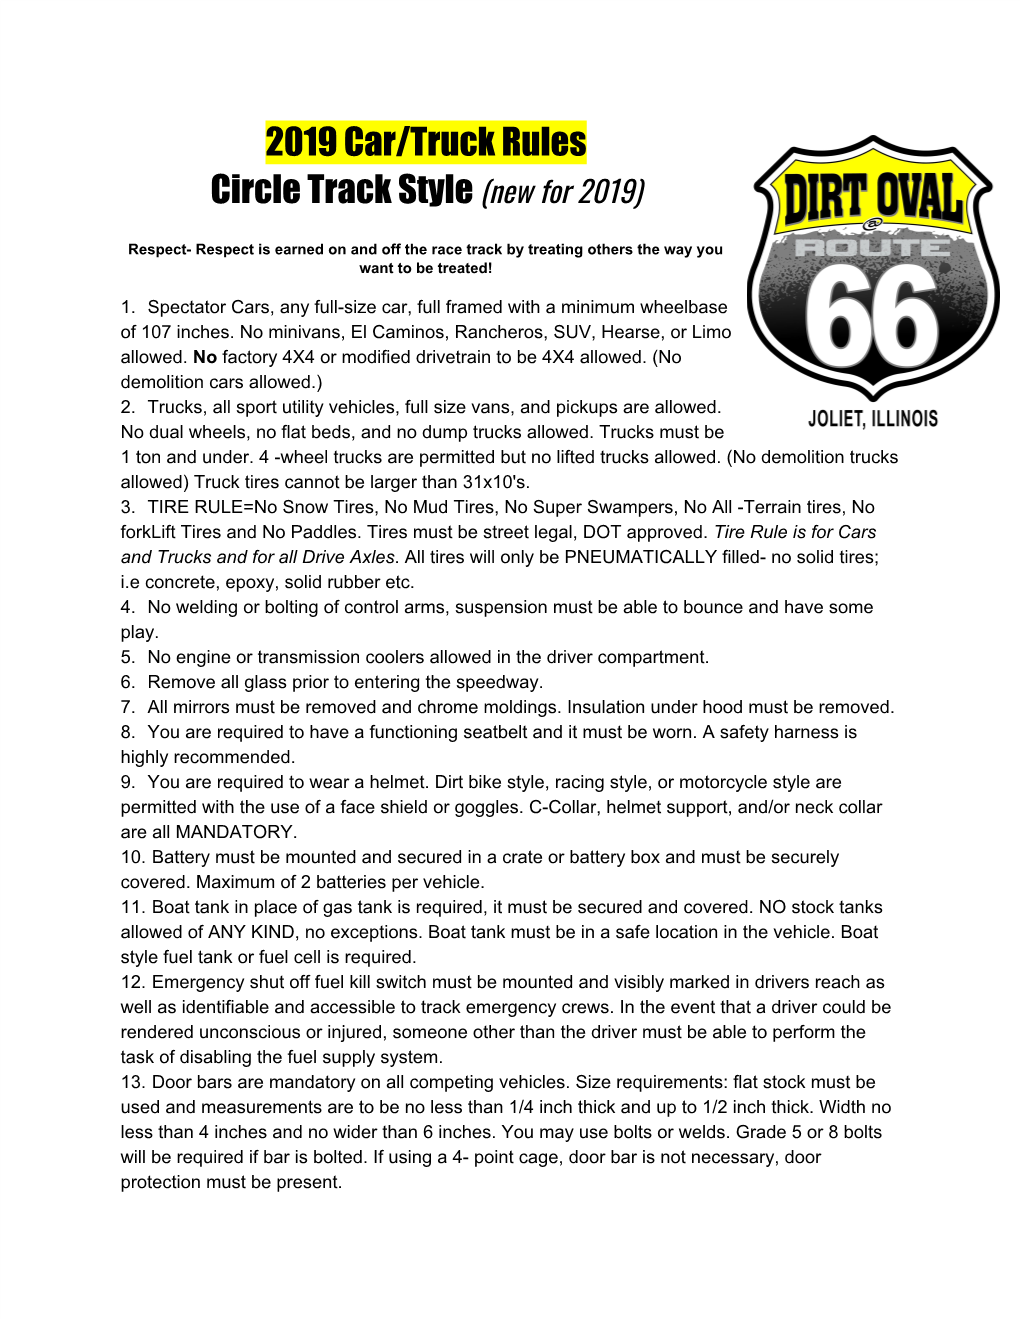 2019 Car/Truck Rules Circle Track Style (New for 2019) ​ Respect- Respect Is Earned on and Off the Race Track by Treating Others the Way You Want to Be Treated!